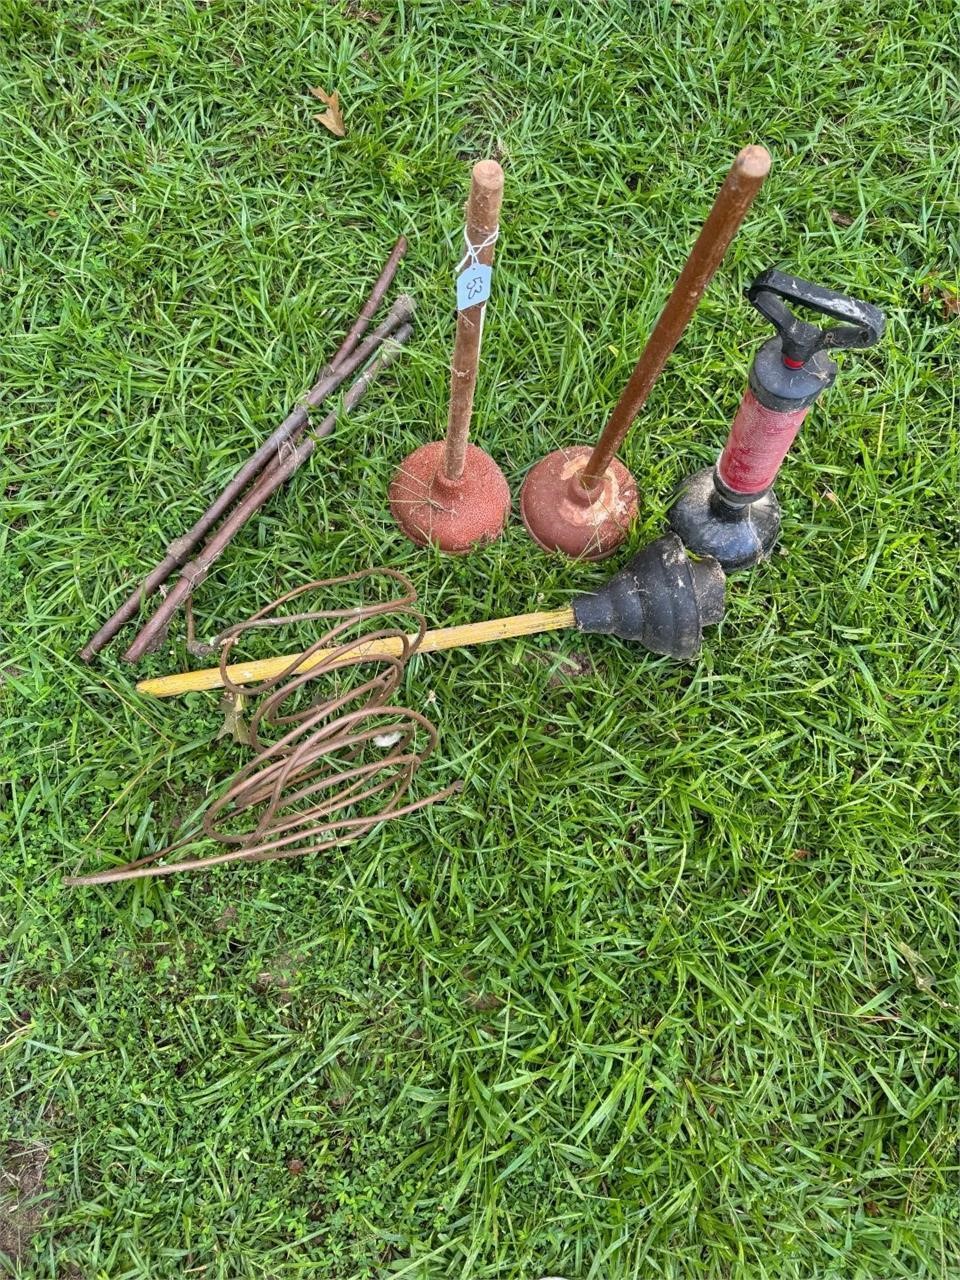 4 plungers, copper wire